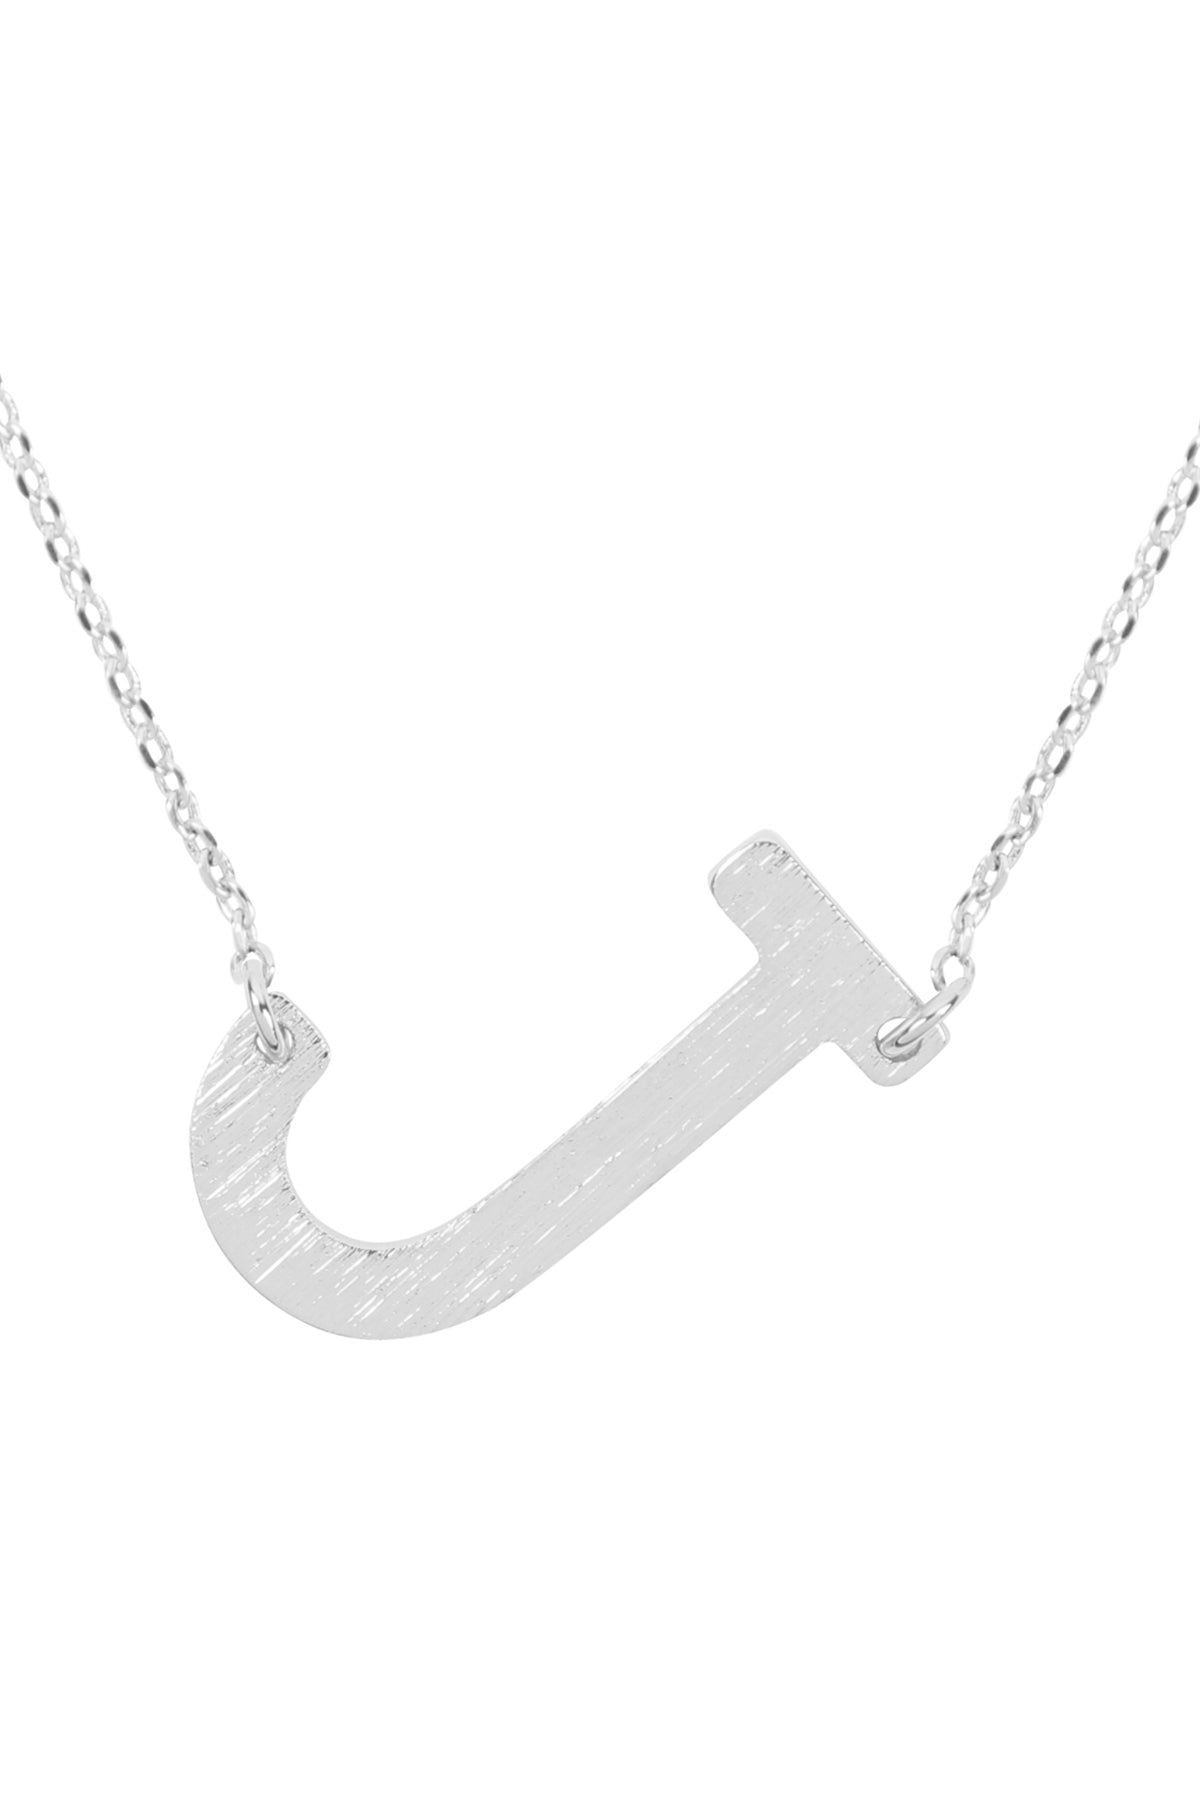 "J" INITIAL ROUGH FINISH CHAIN NECKLACE